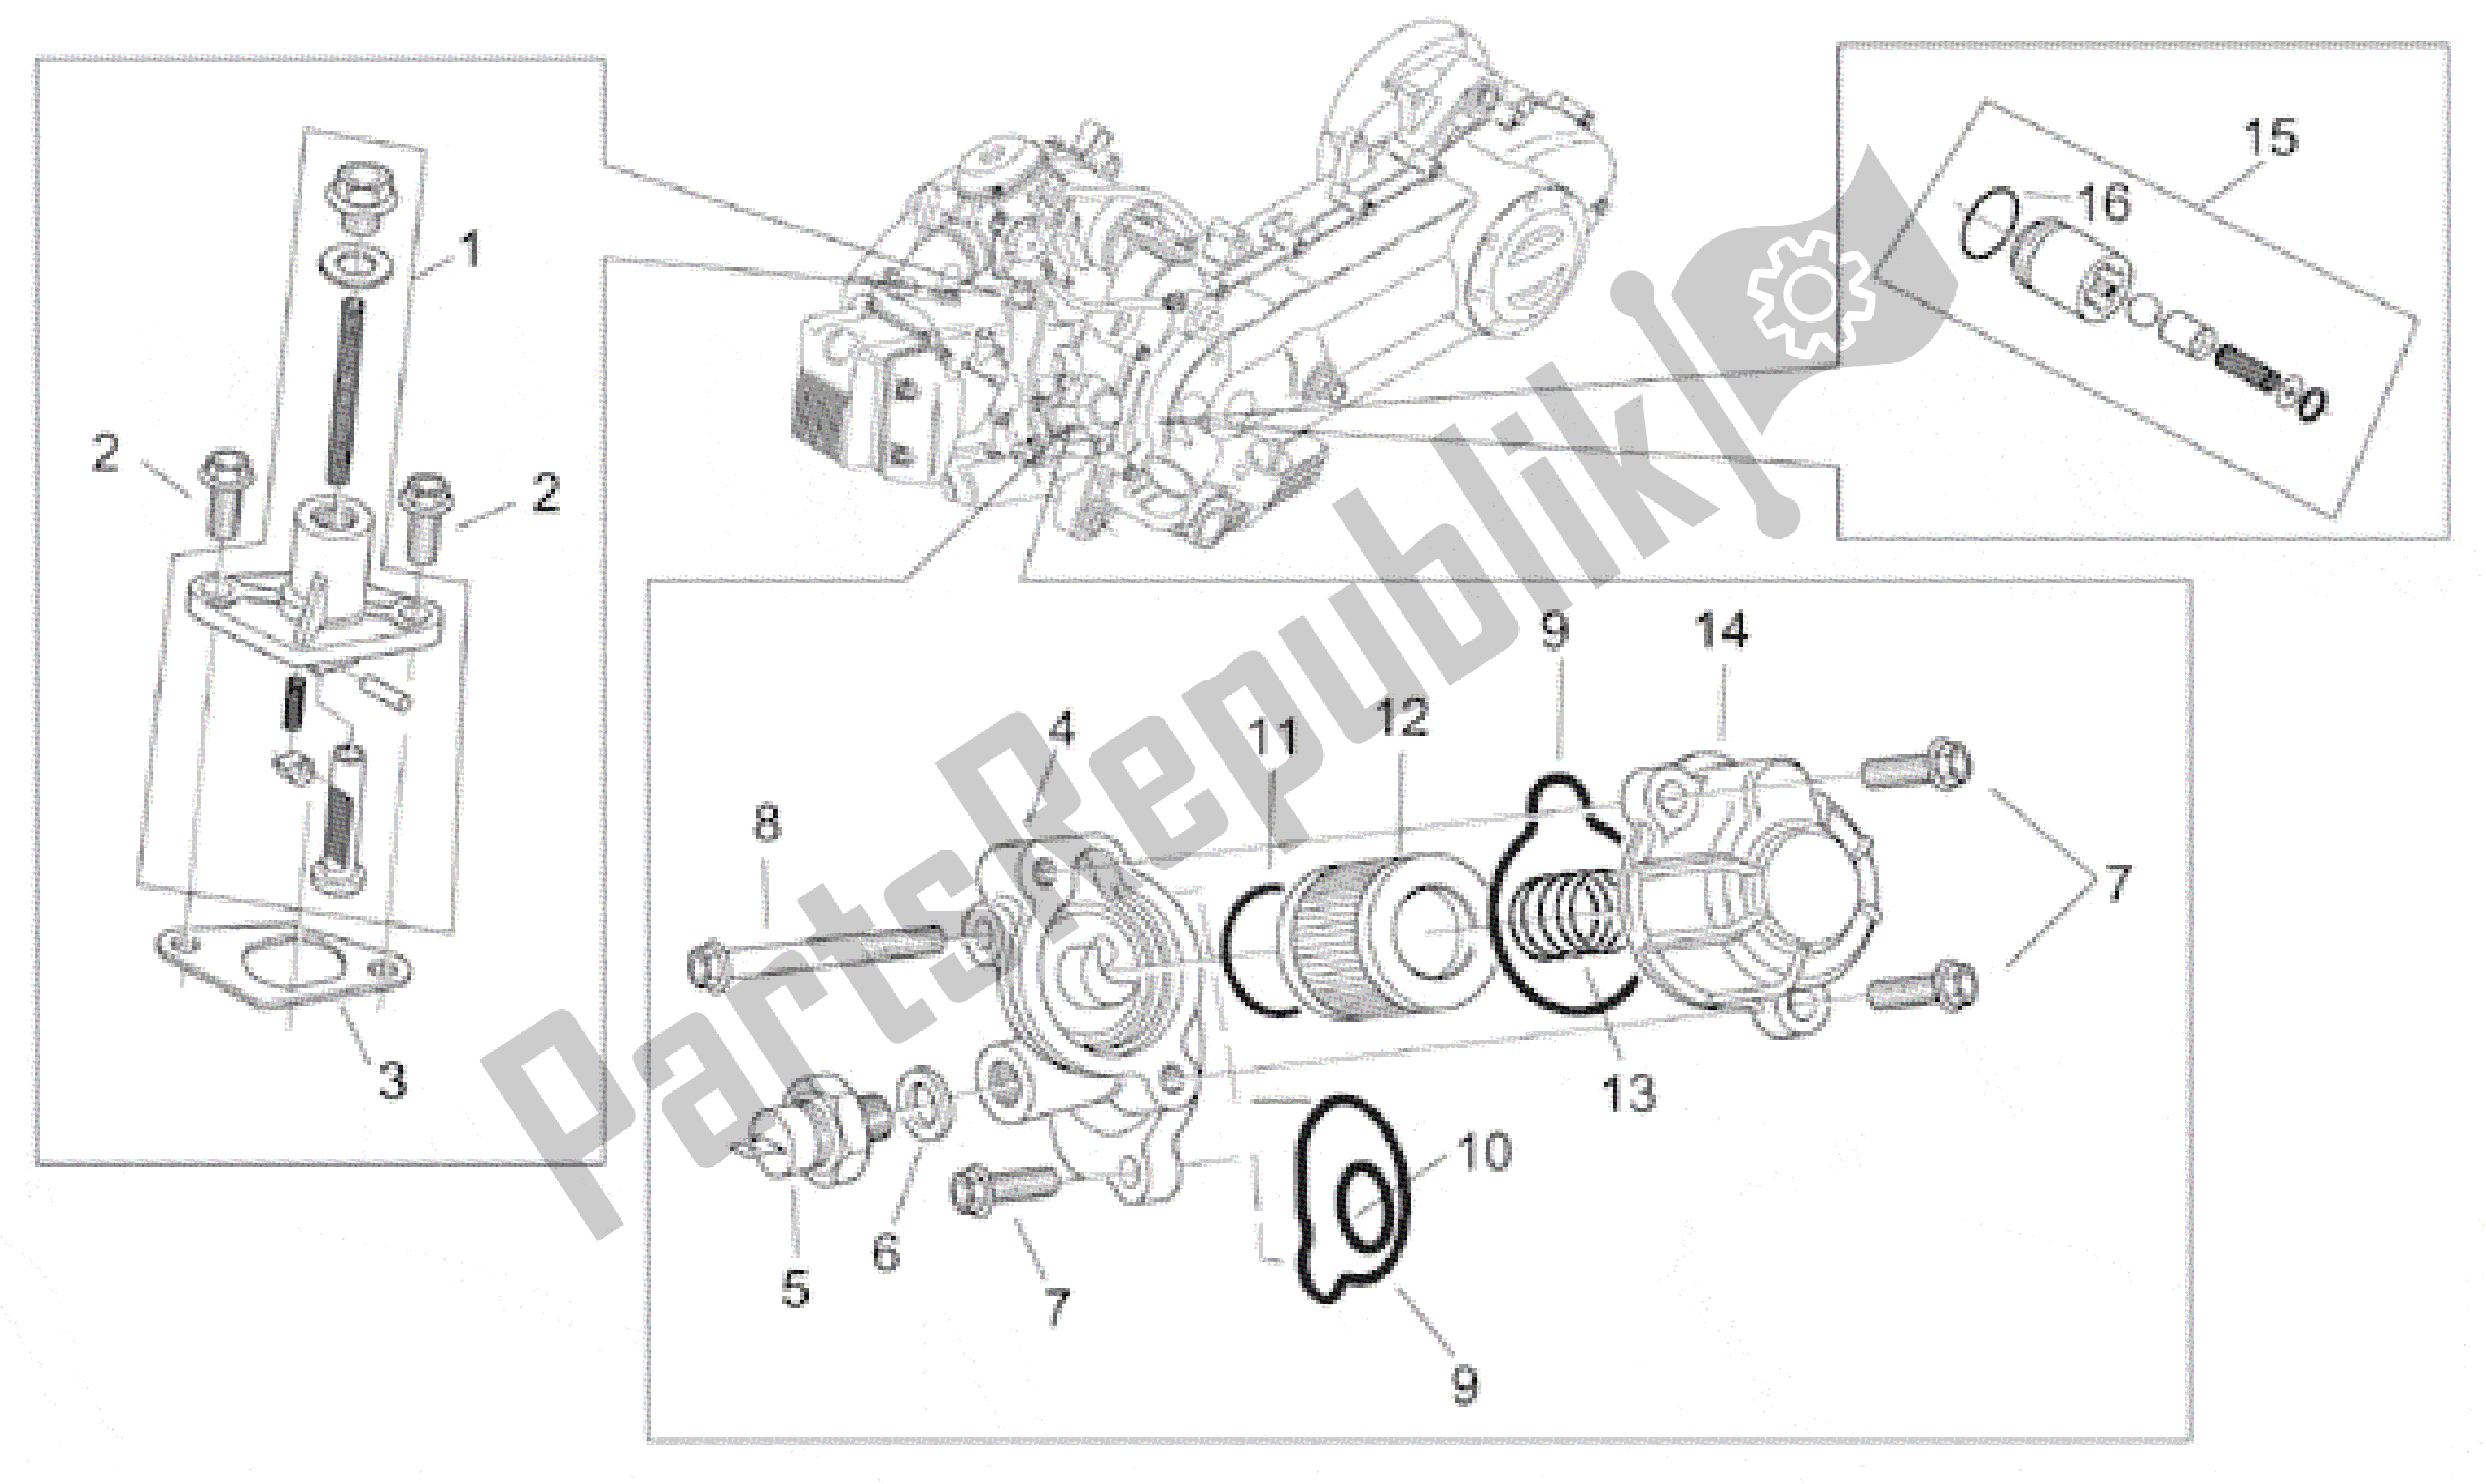 All parts for the Oil Filter - Chain Tensioner of the Aprilia Habana 125 1999 - 2001